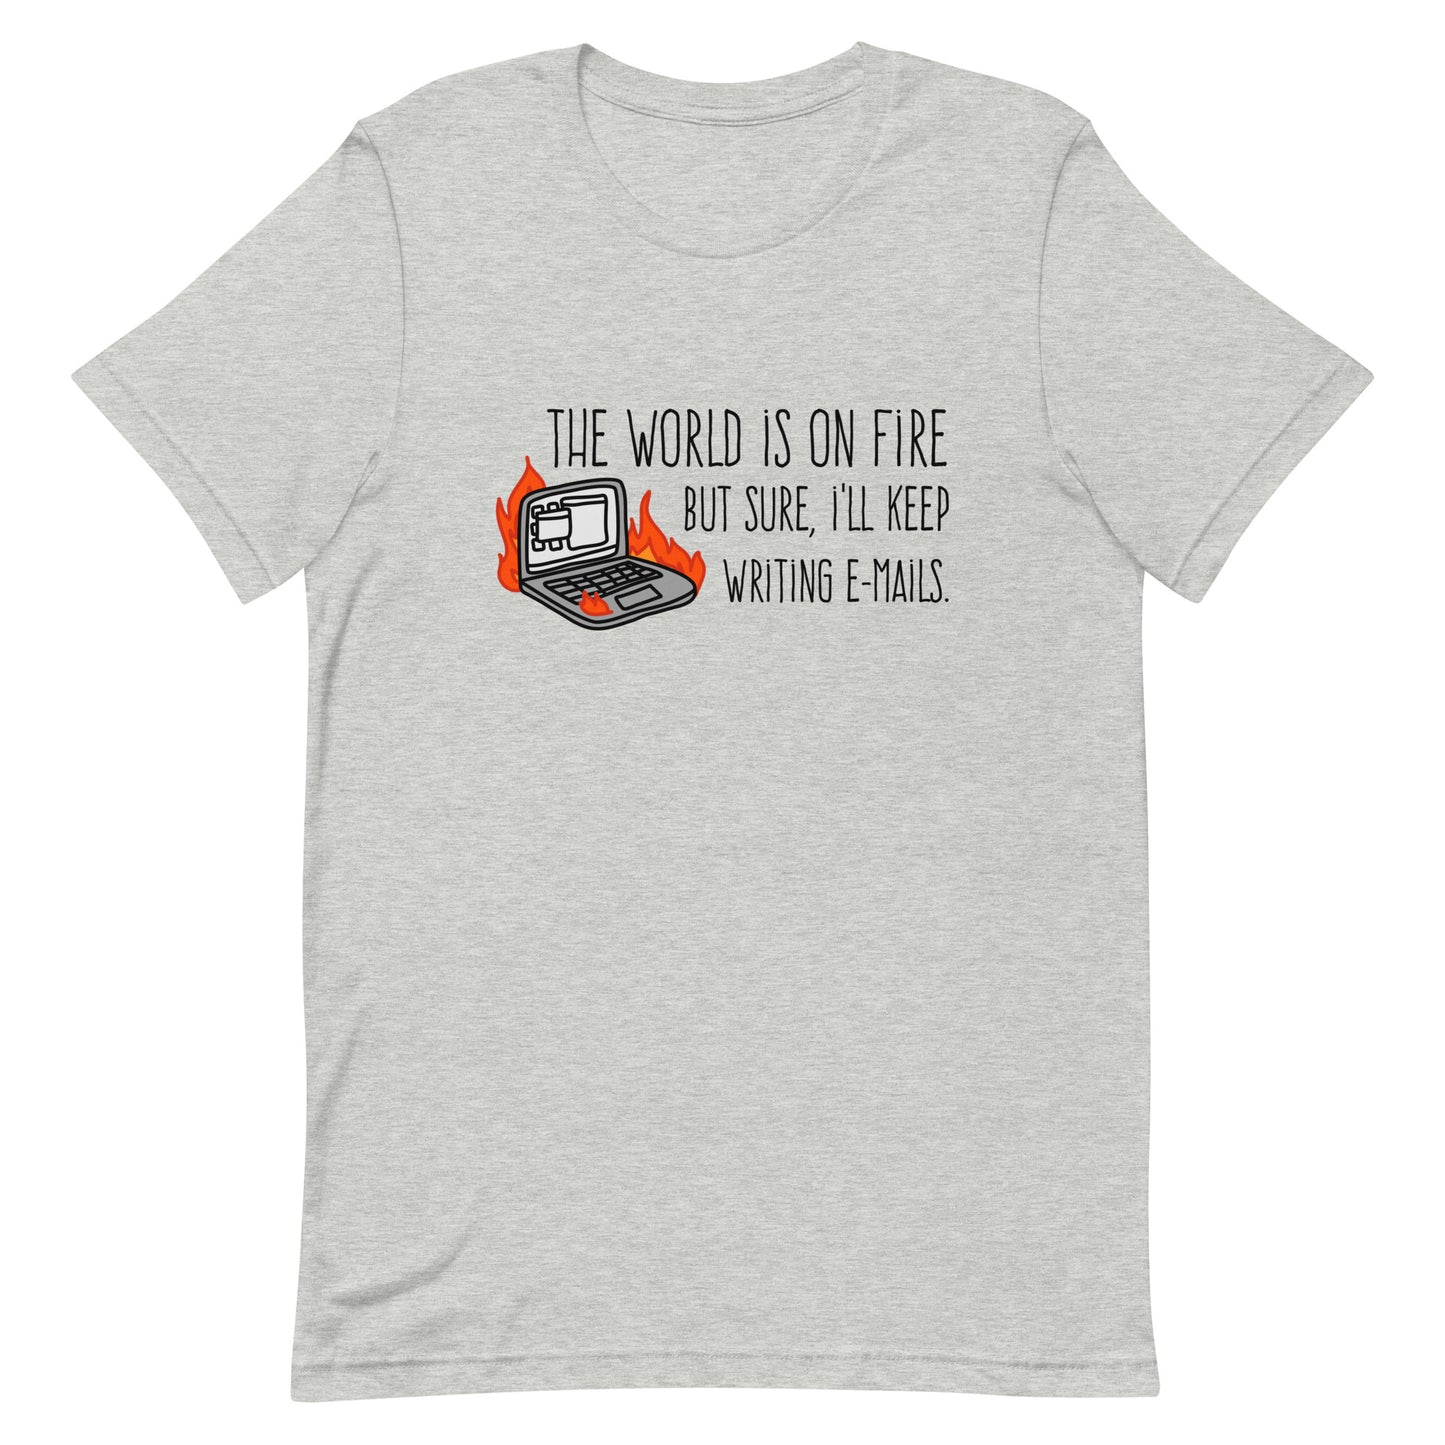 A light grey crewneck t-shirt featuring a squiggly illustration of a laptop that is on fire. Text alongside the laptop reads "the world is on fire but sure, I'll keep writing e-mails."